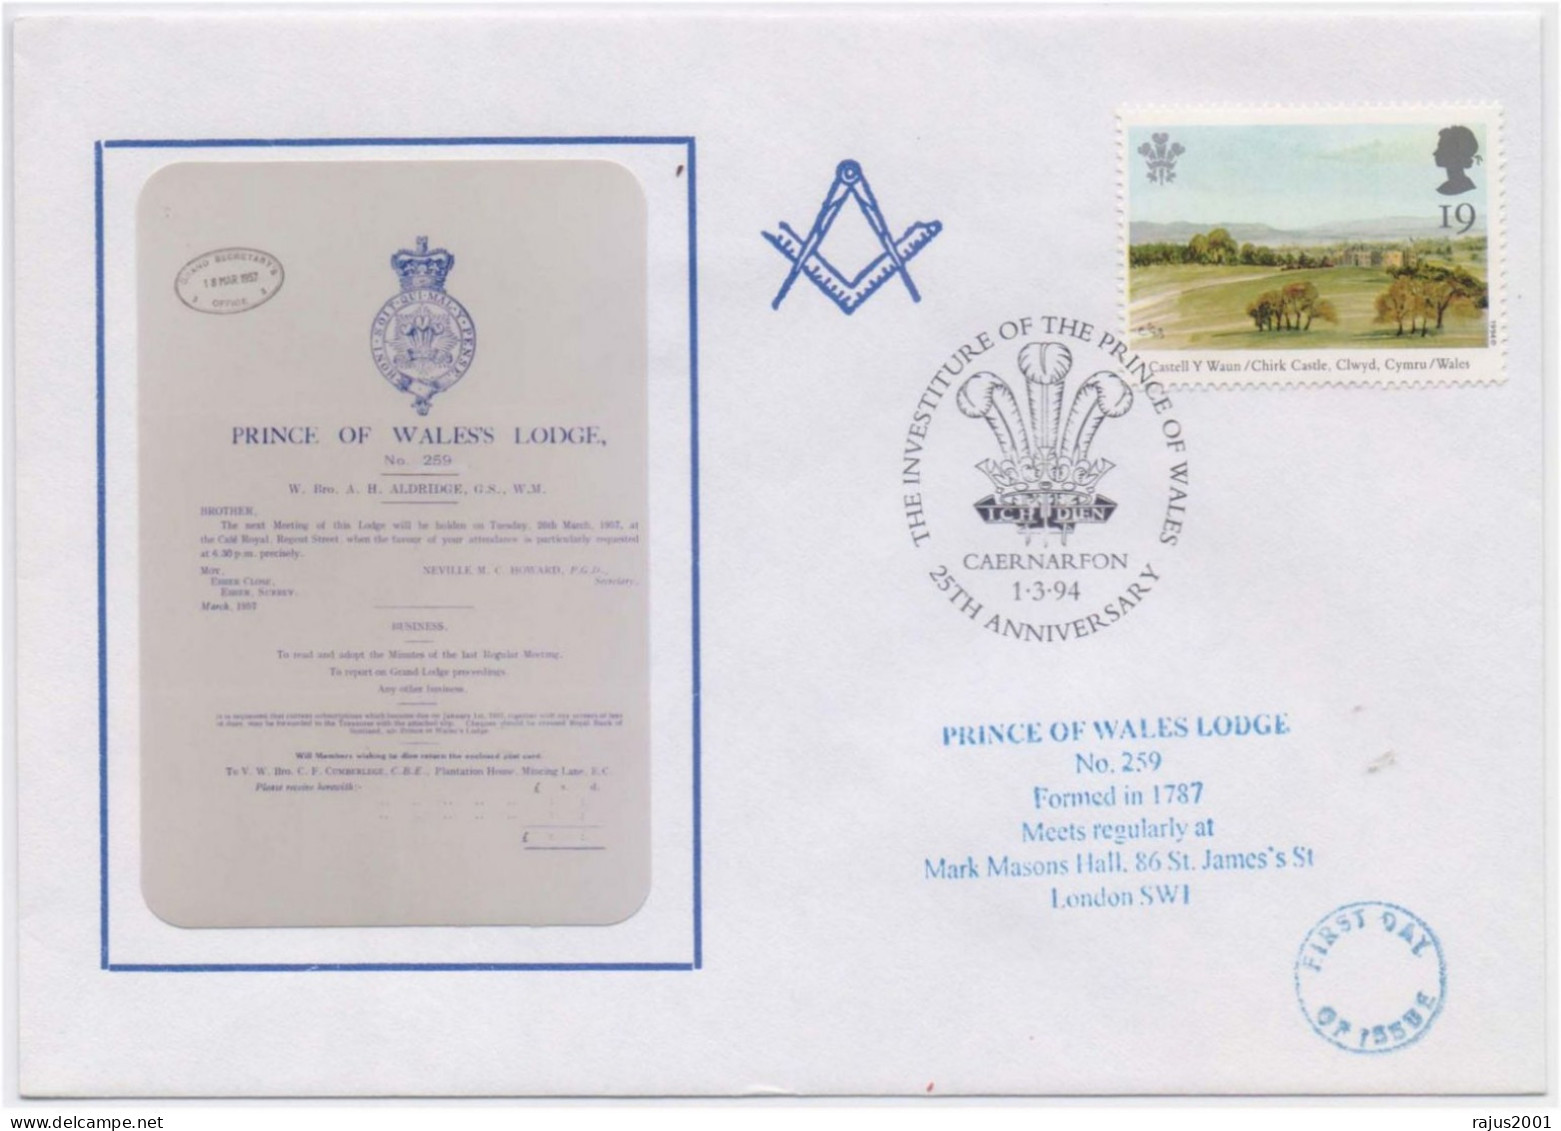 PRINCE OF WALES LODGE NO 259, FORMED IN 1787, Freemasonry Masonic Limited Only 75 Cover Issued Great Britain Cover - Freemasonry